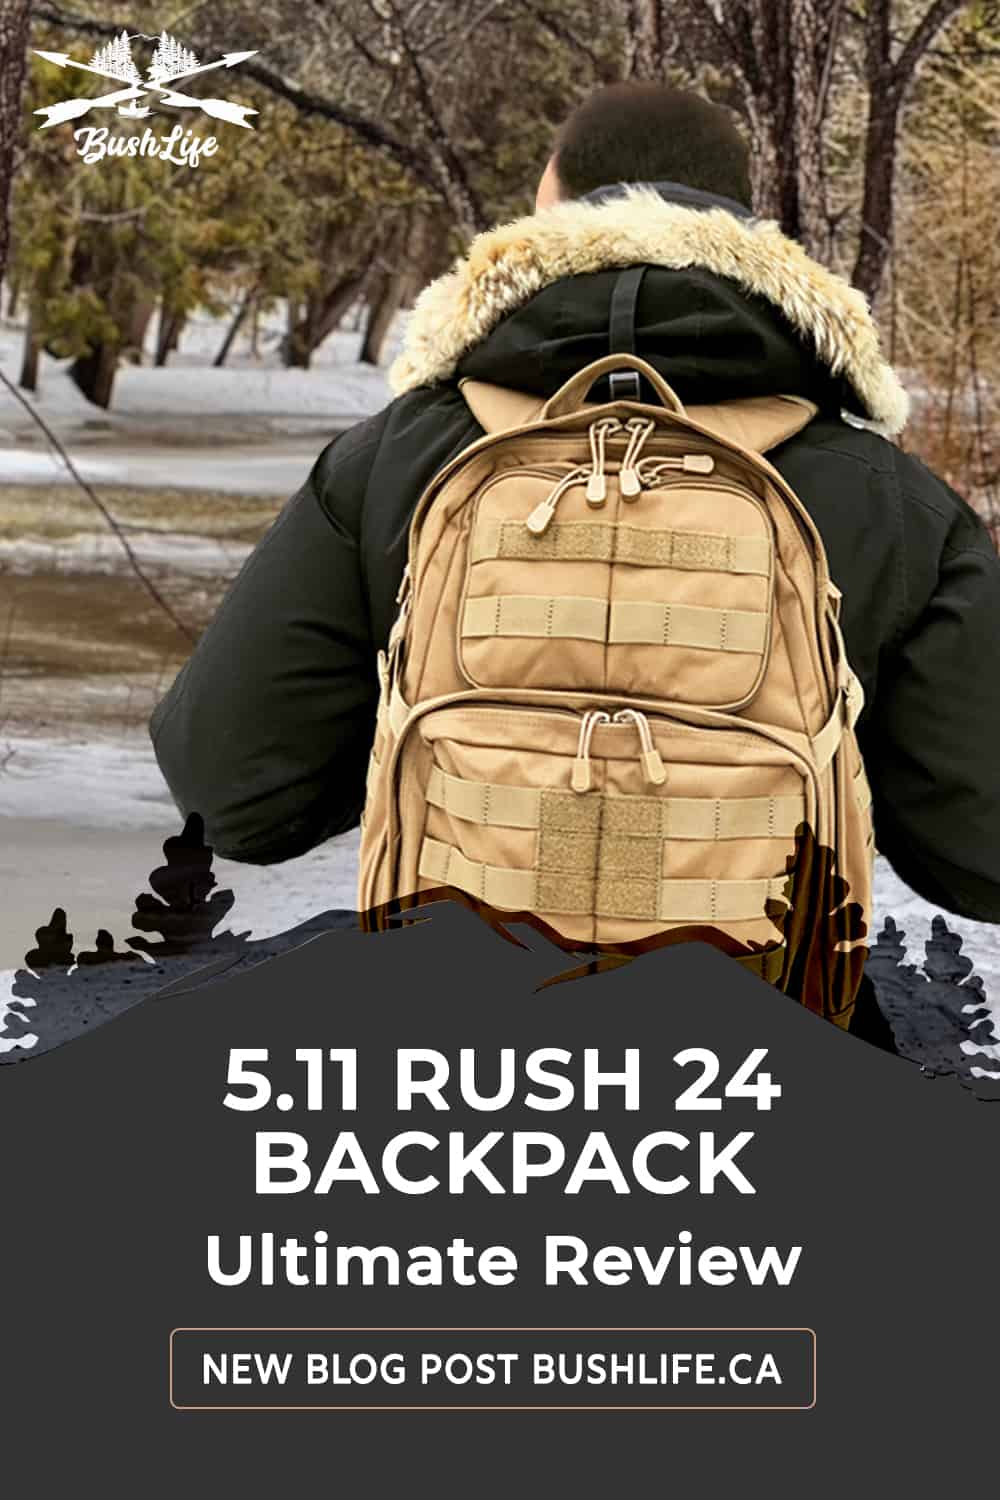 5.11 Rush 24 Backpack Ultimate Review